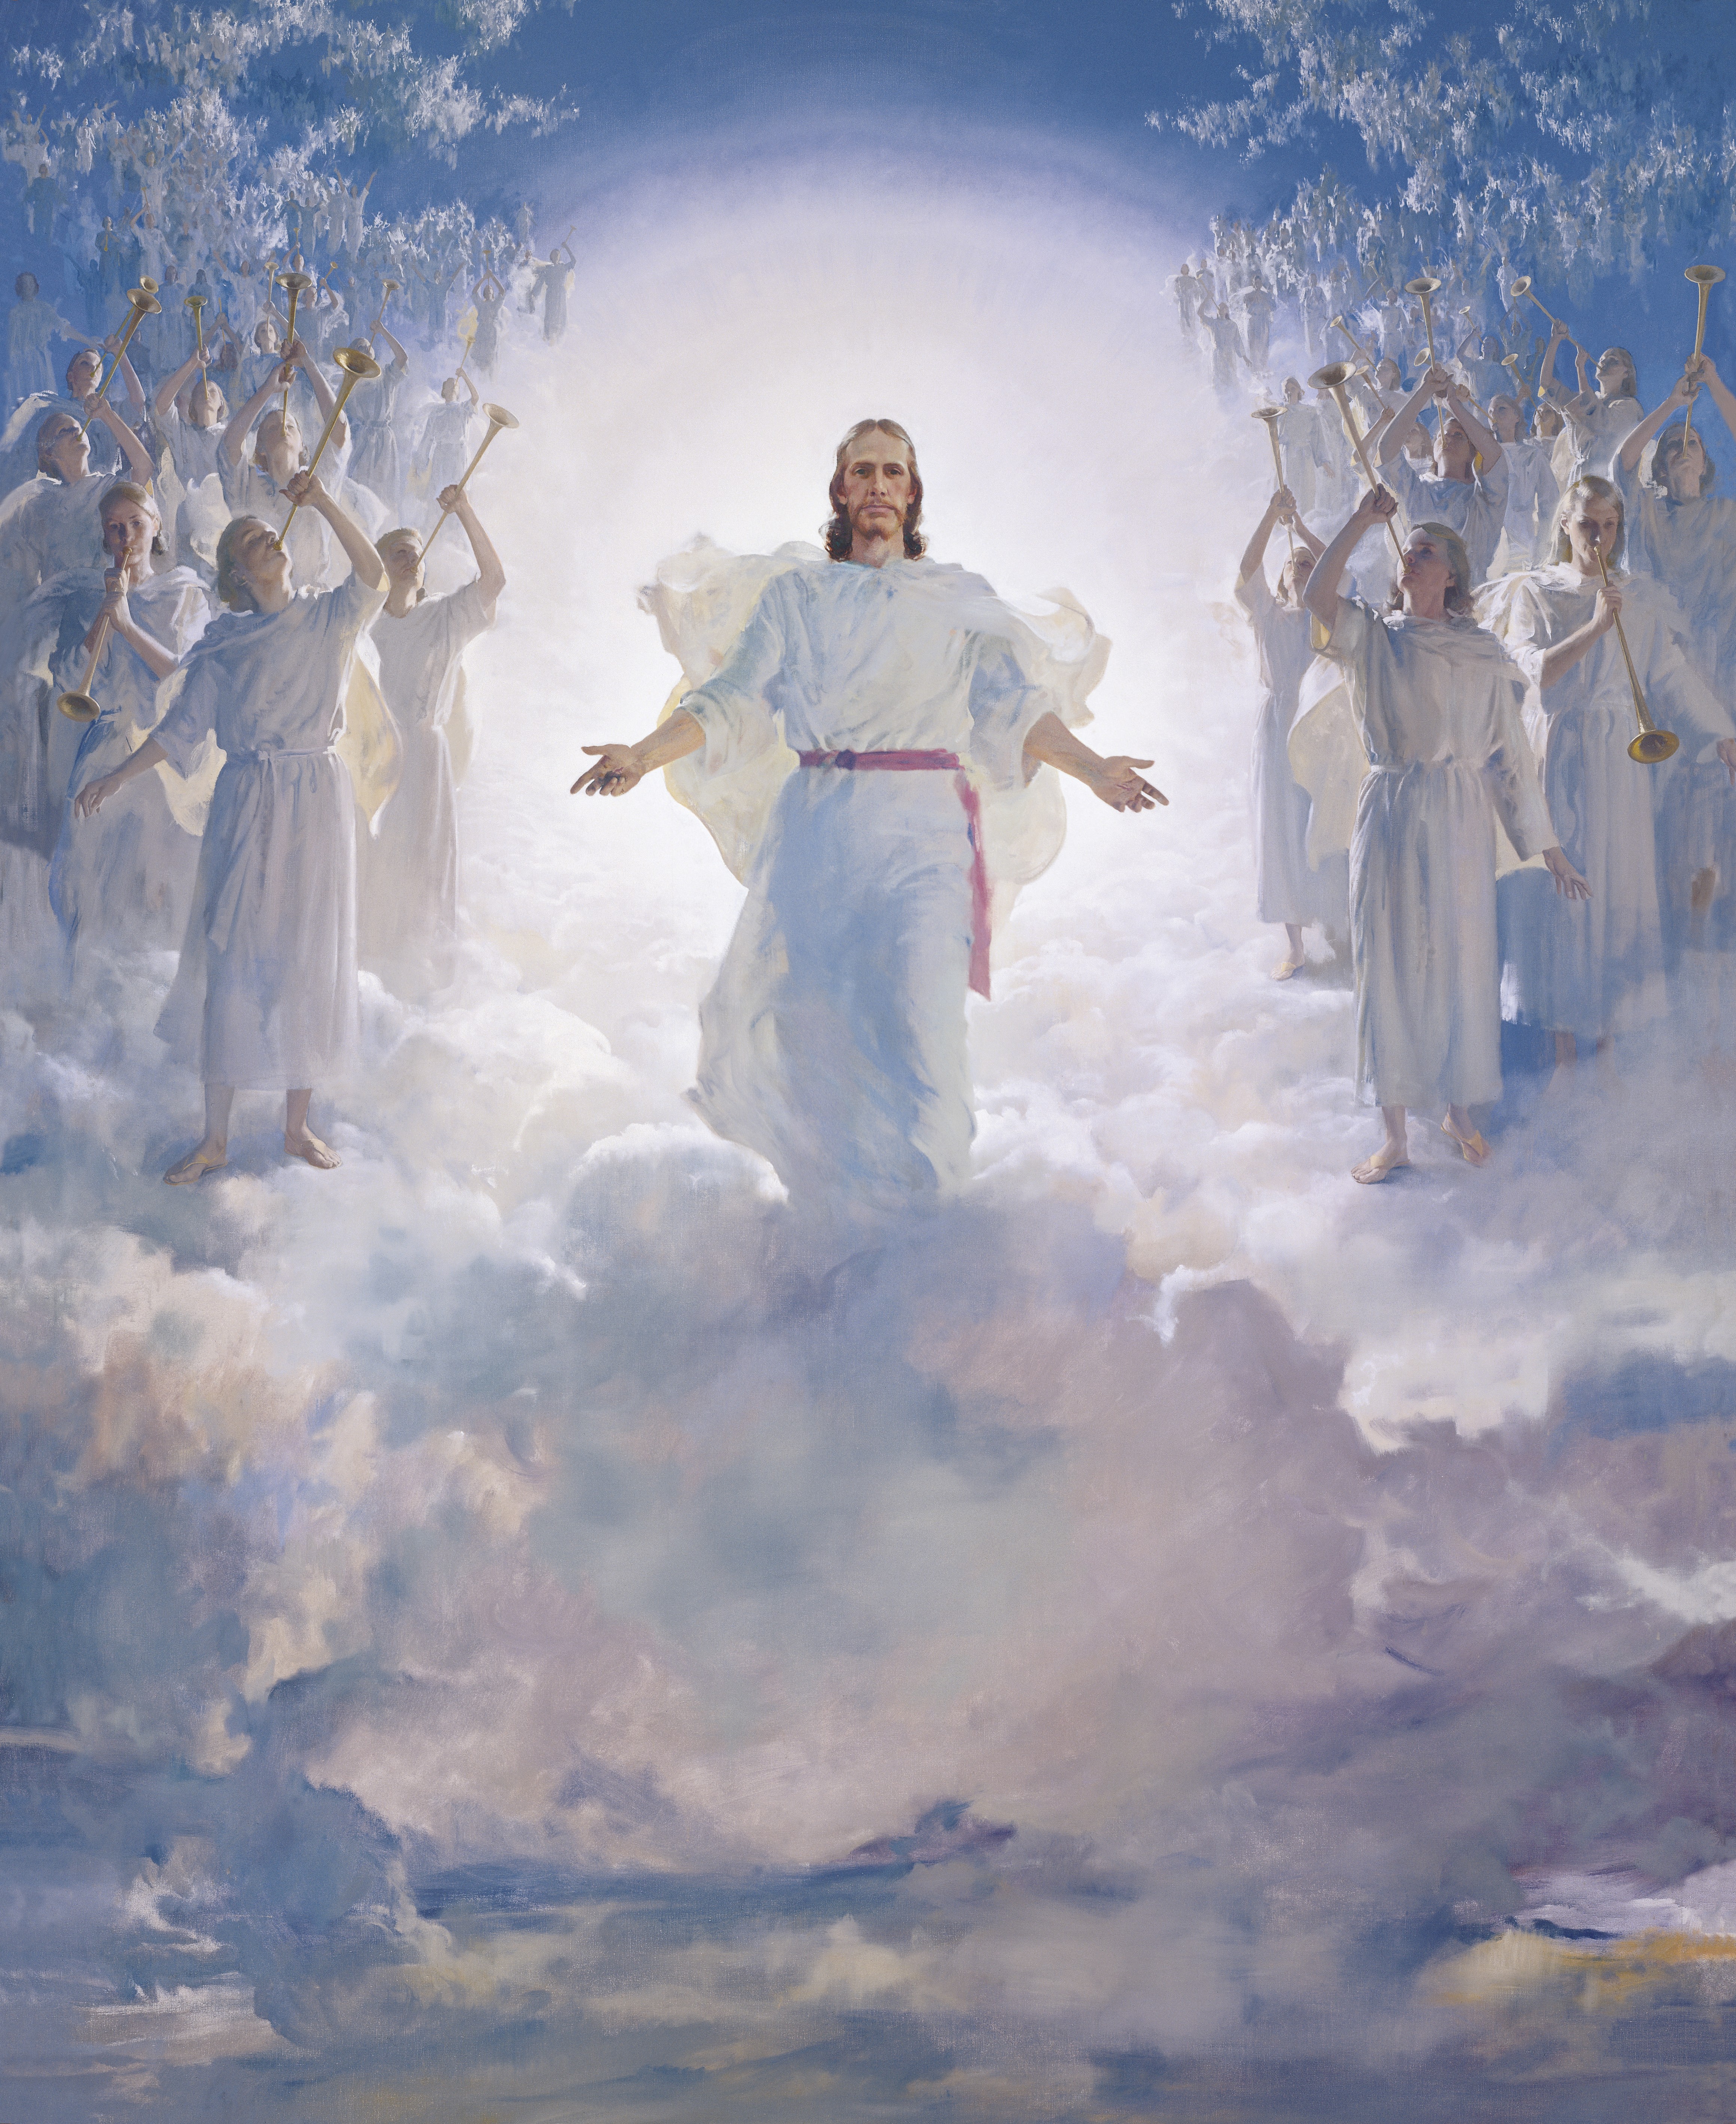 Jesus Christ in white robes and a red sash, standing on a cloud in the air, surrounded by thousands of angels blowing trumpets.